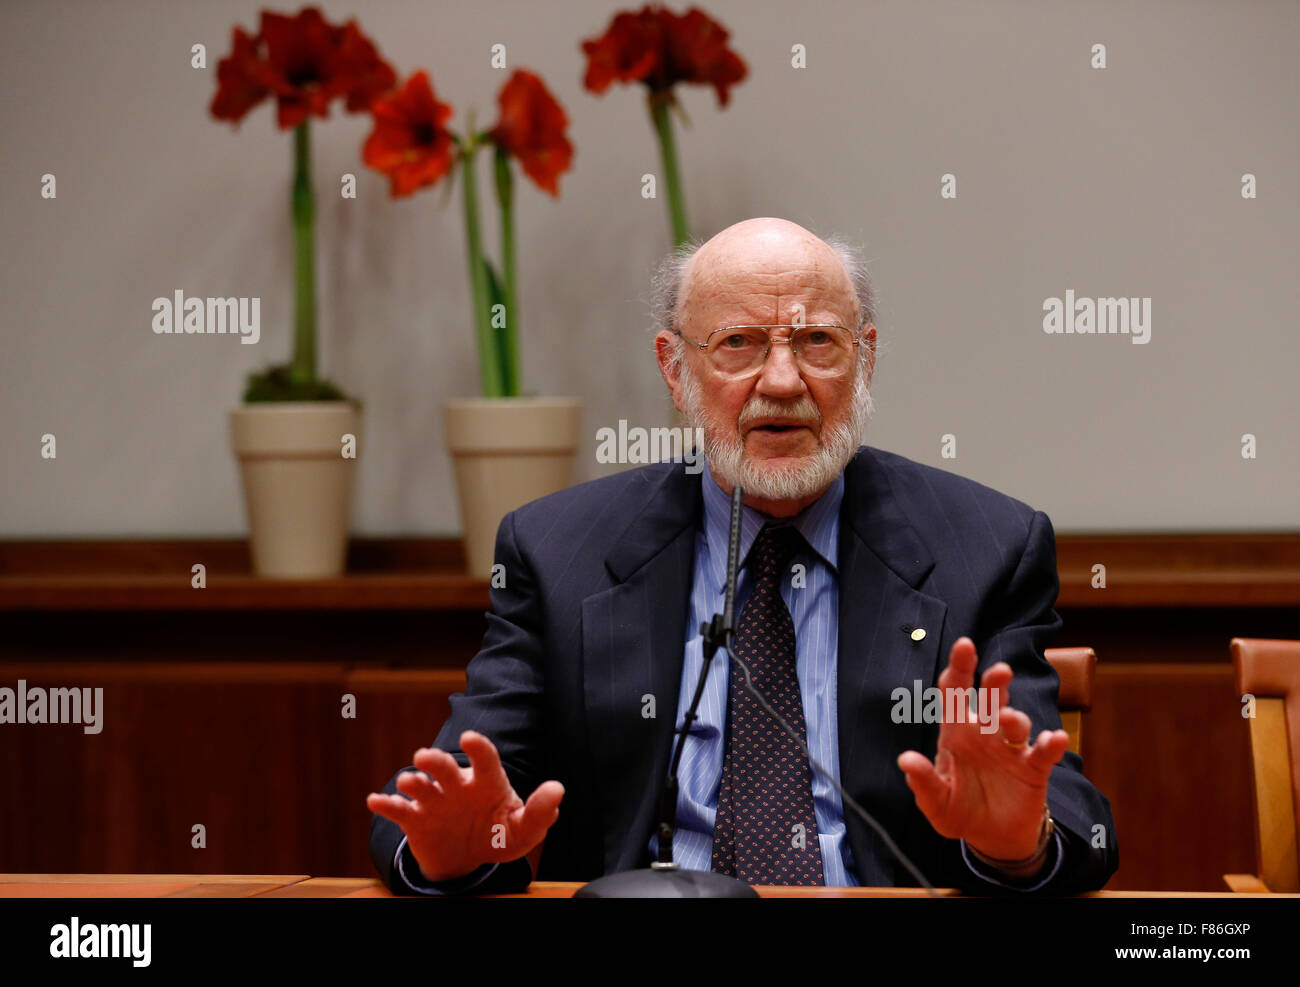 (151206) -- STOCKHOLM, Dec. 6, 2015 (Xinhua) -- The 2015 Nobel Prize laureate for Physiology or Medicine William C. Campbell talks during a press conference at Karolinska Institute in Stockholm, capital of Sweden, Dec. 6, 2015.  (Xinhua/Ye Pingfan) Stock Photo